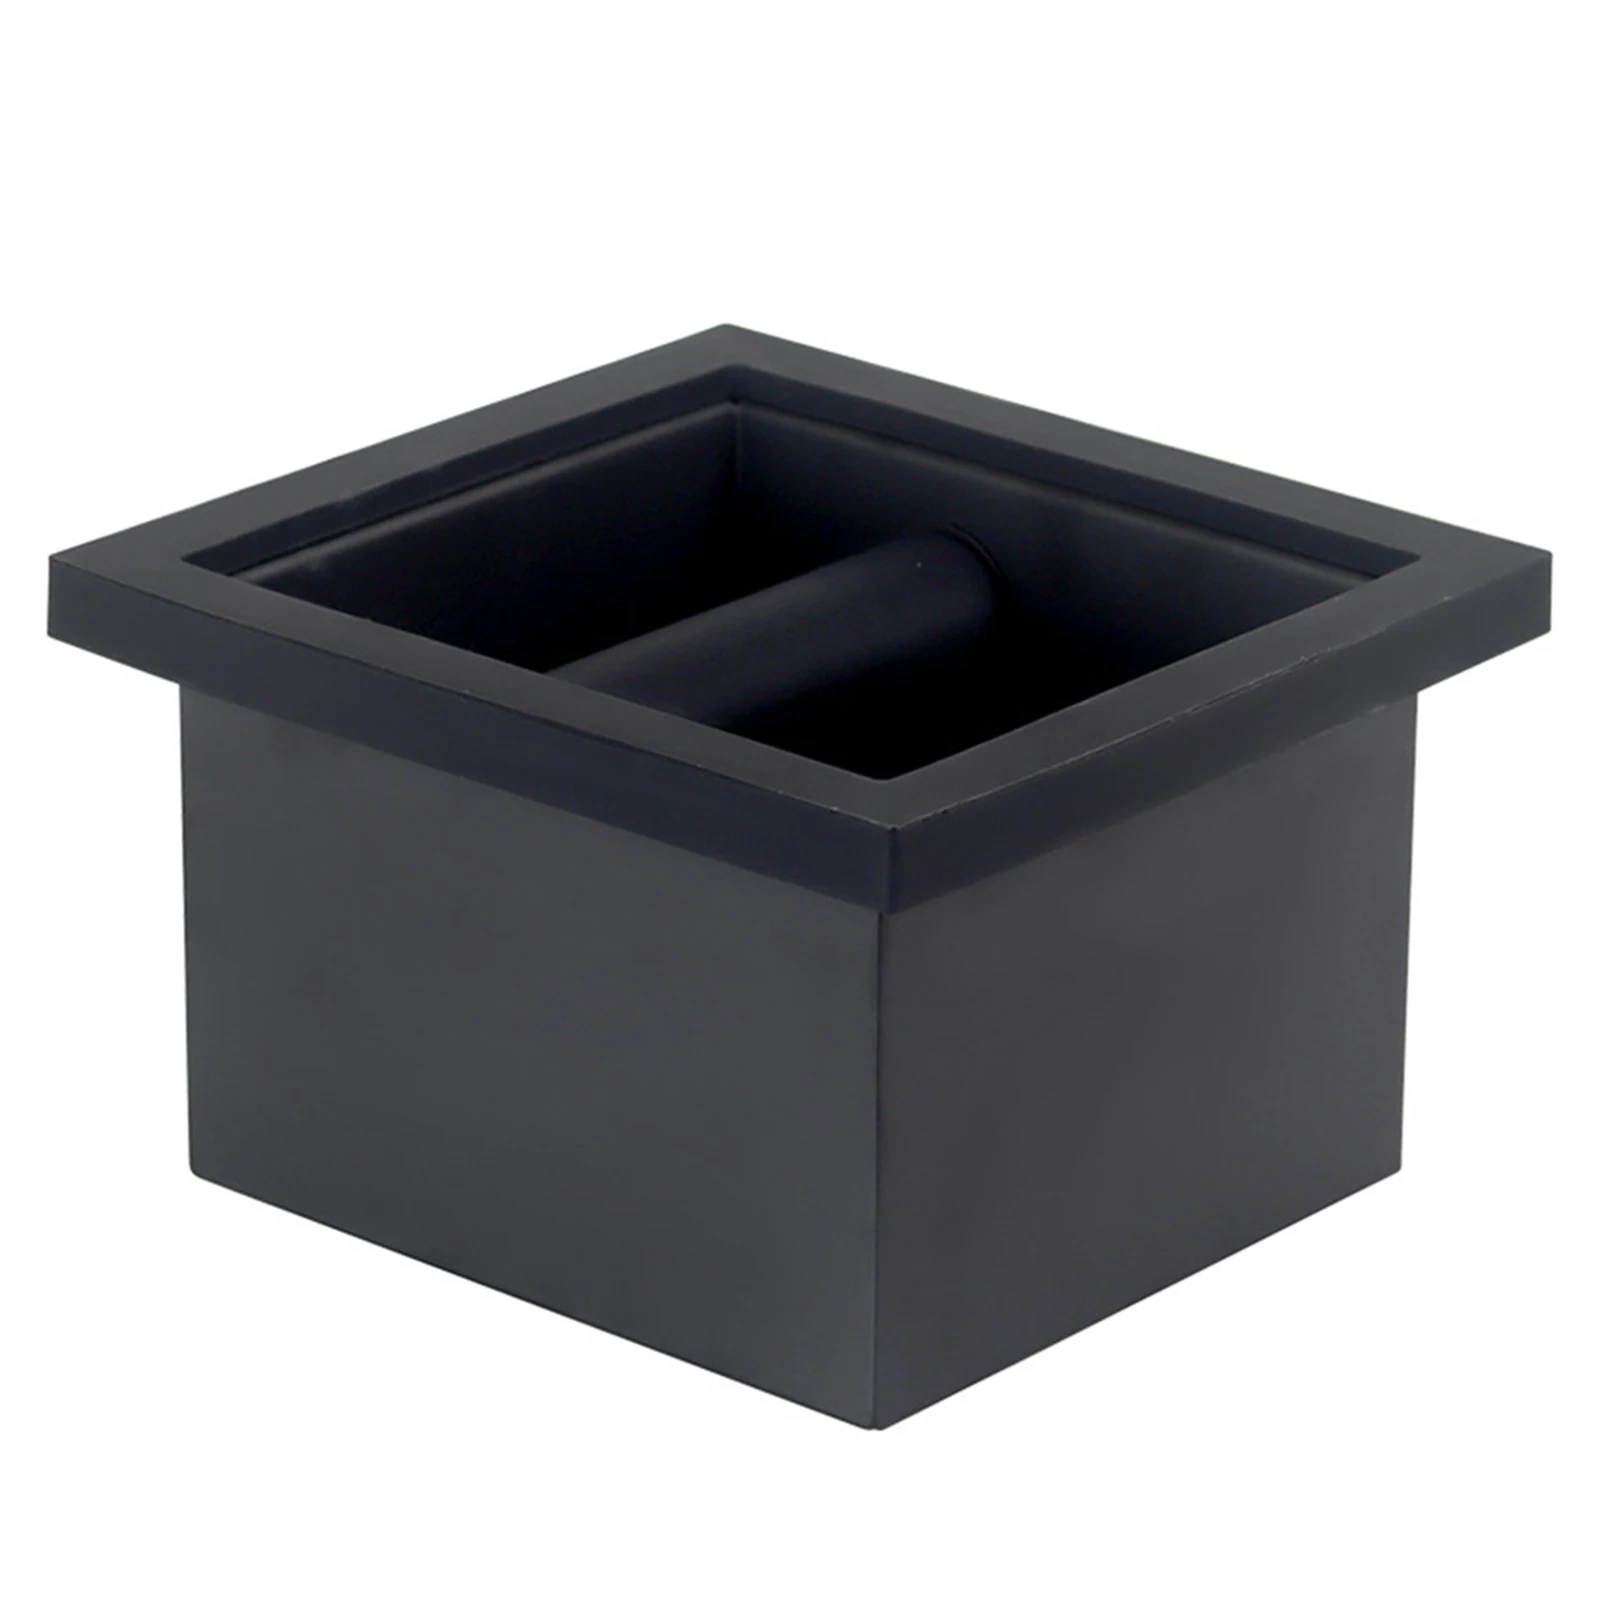 

1pc Coffee Grounds Box Knock Box Bucket Desktop Embedded Bottomless Stainless Steel 11*18*16.7cm Coffeeware Accessories